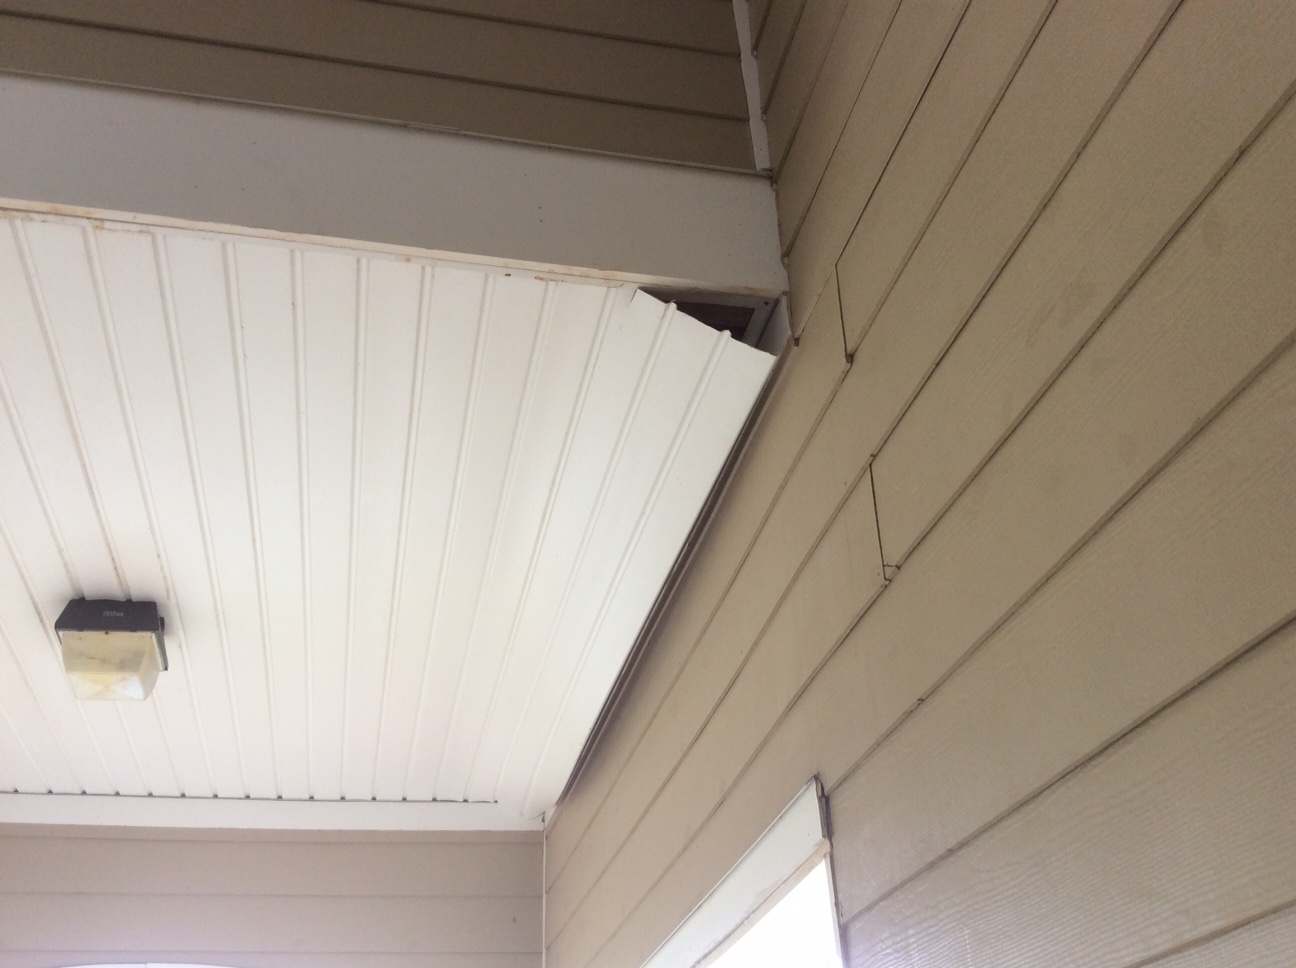 This is white vinyl soffit that needs to be reattached to the ceiling.